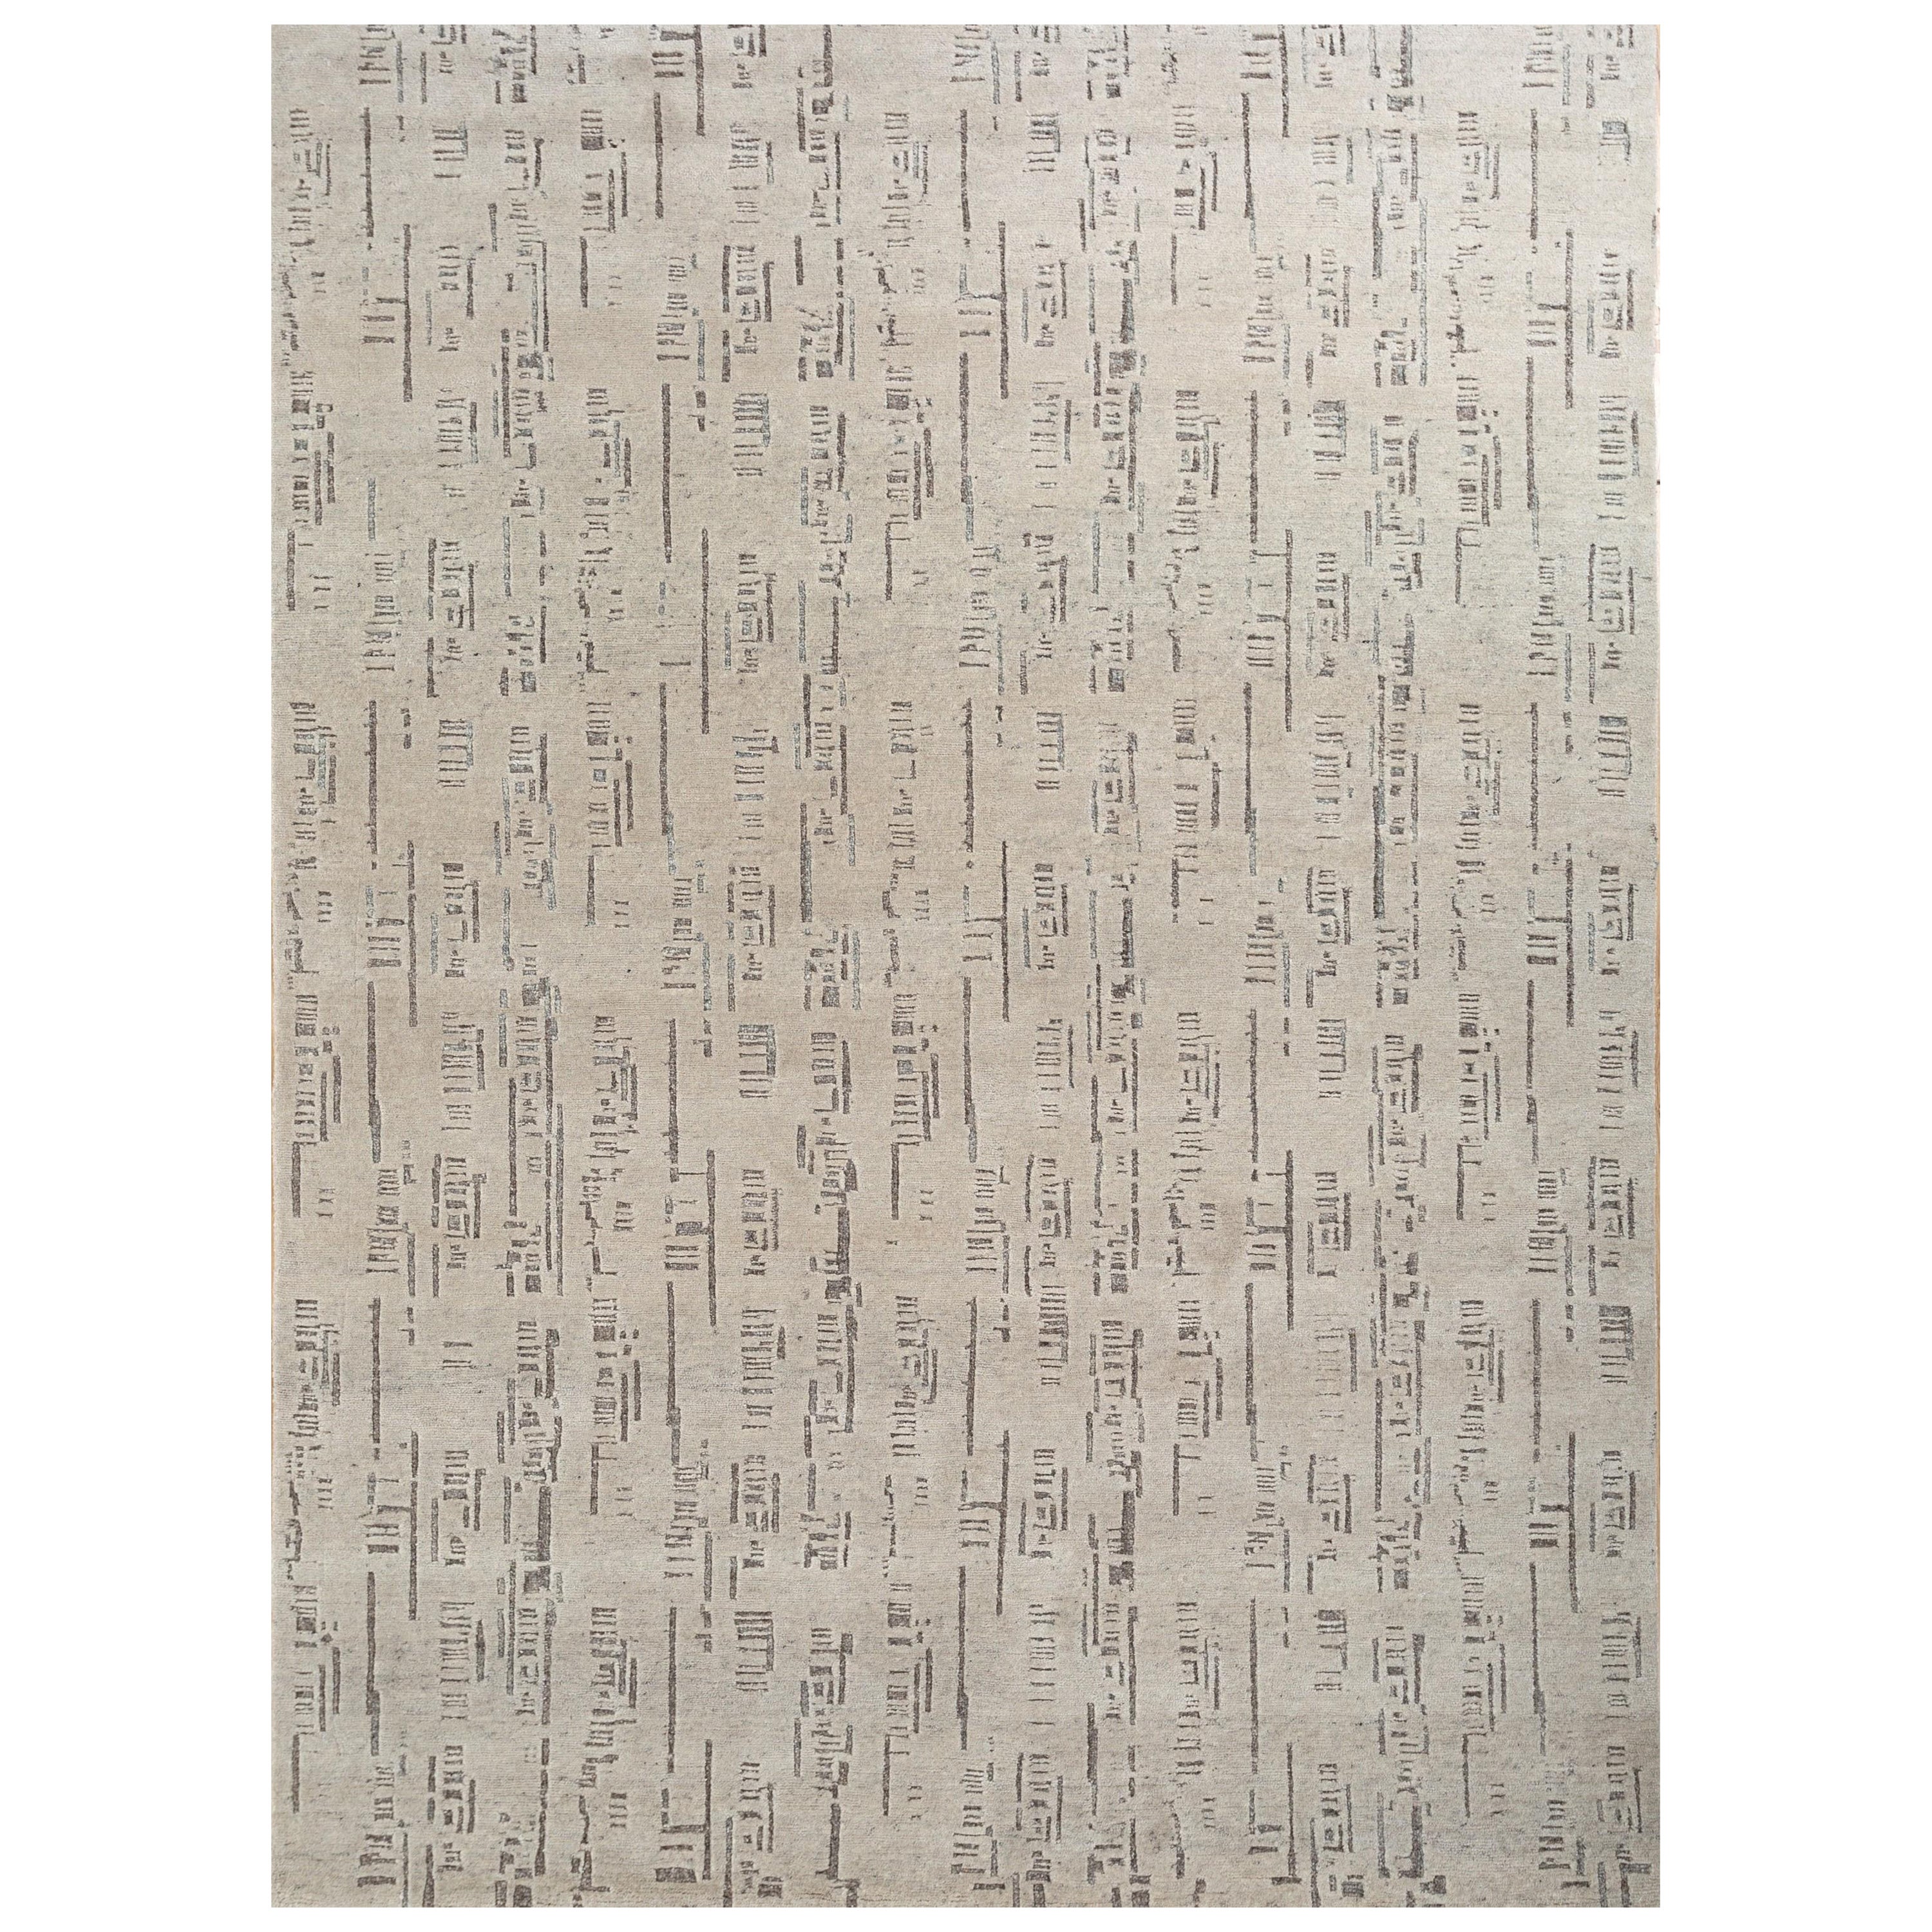 Majestic Marrakech Essence Marble & Natural Soot 180X270 cm Handknotted Rug